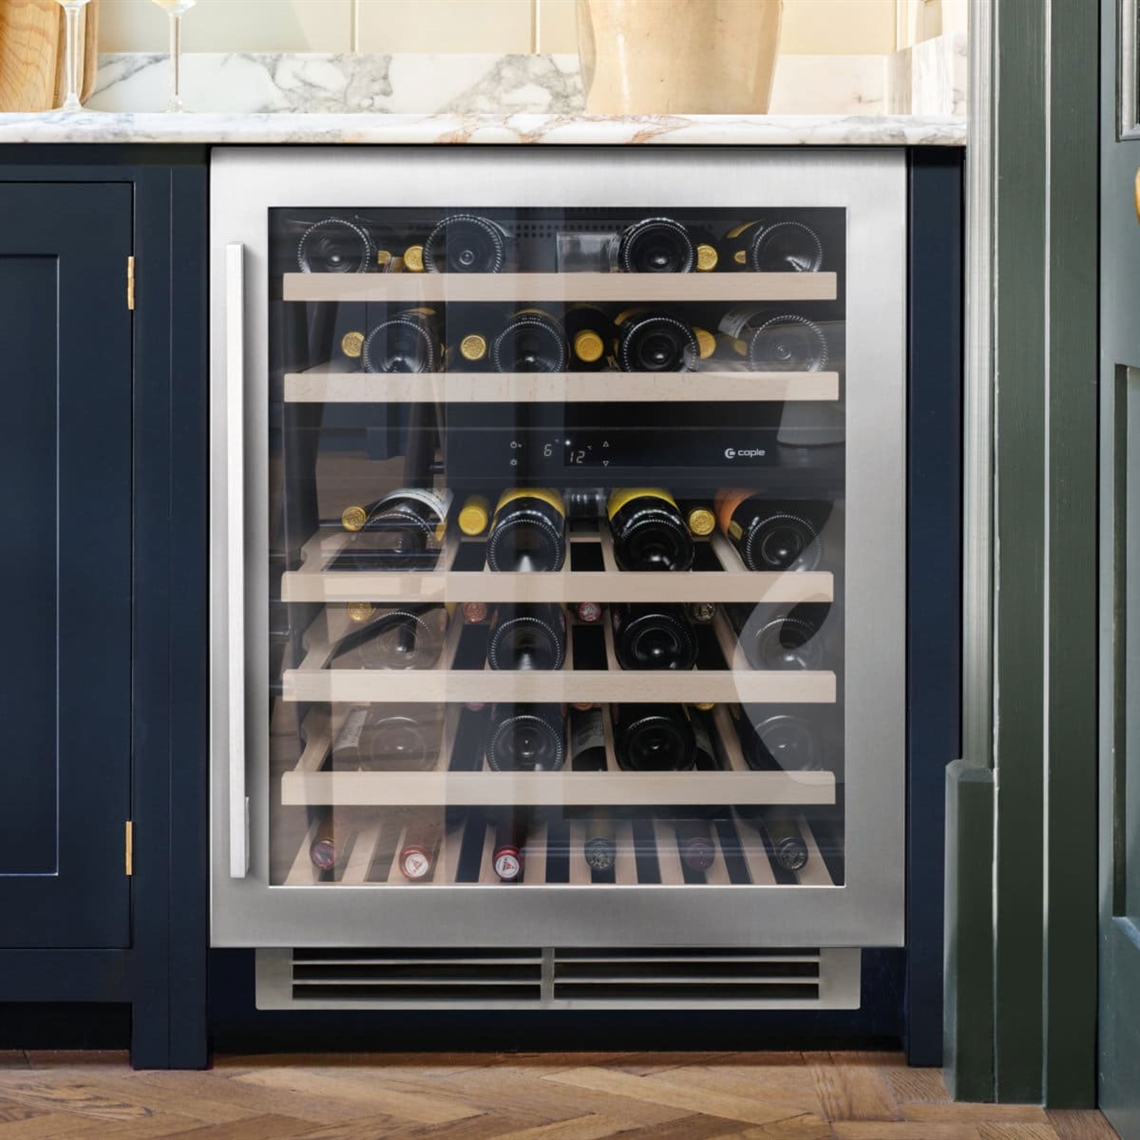 Caple Wine Cabinet Classic - 2 Temperature Slot-In - Stainless Steel Wi6135